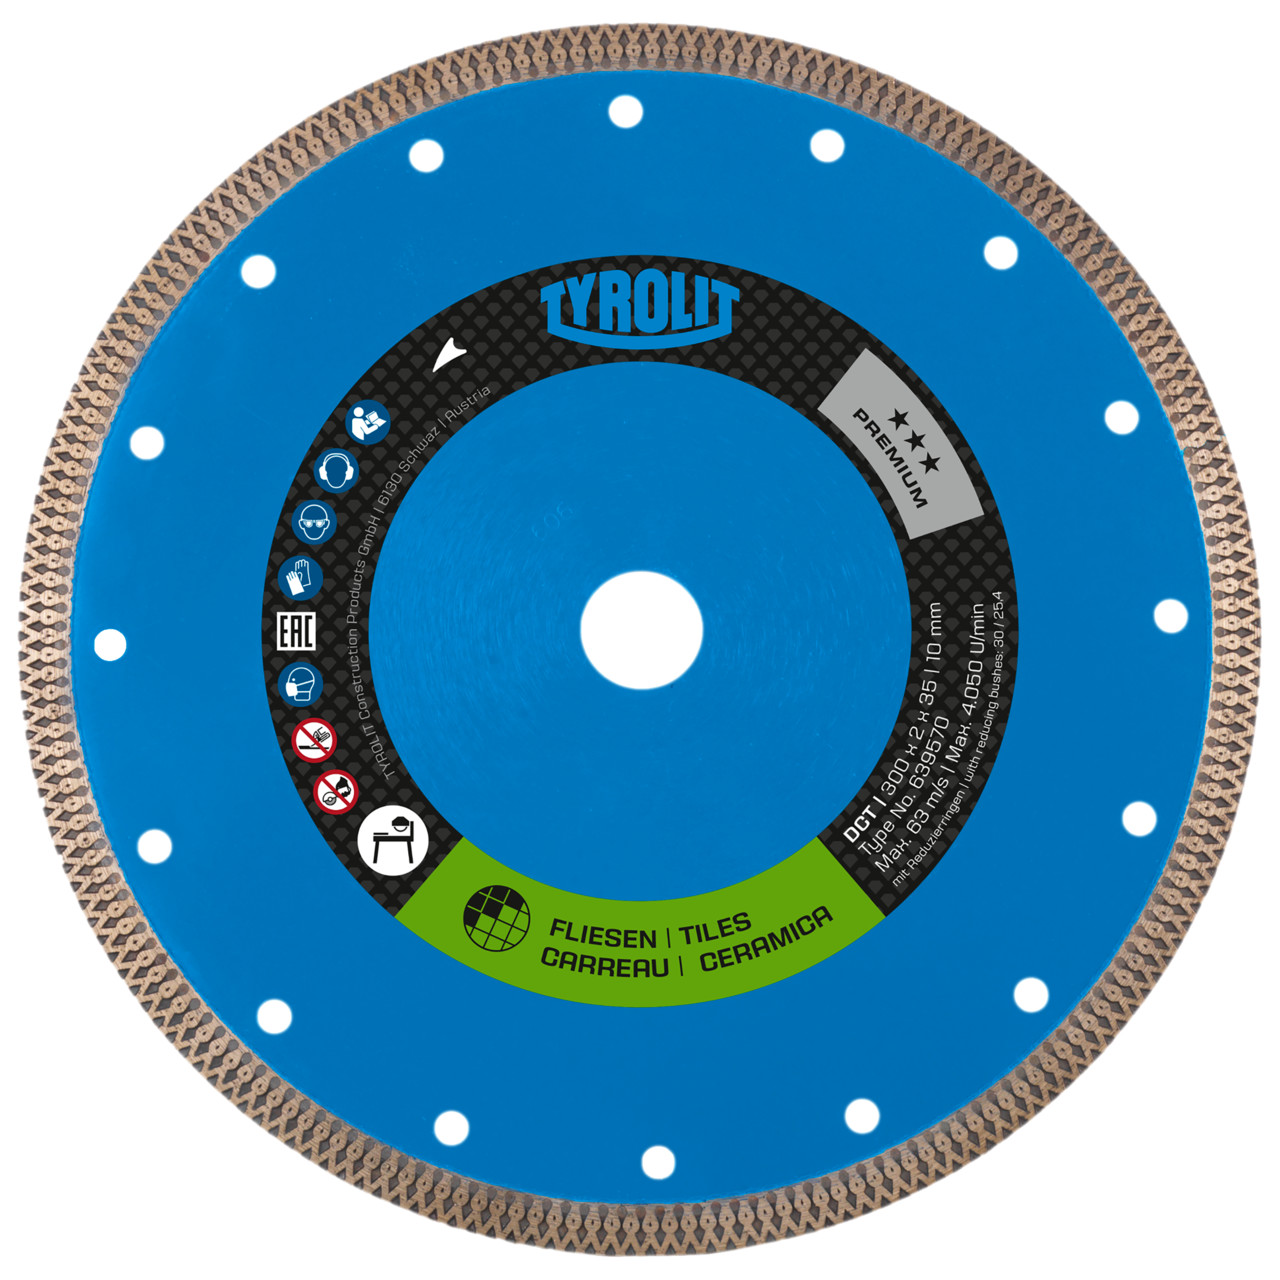 TYROLIT table saw blade DxTxH 230x1.6x35 DCT, shape: 1A1R (cut-off wheel with continuous cutting wheel), Art. 639568